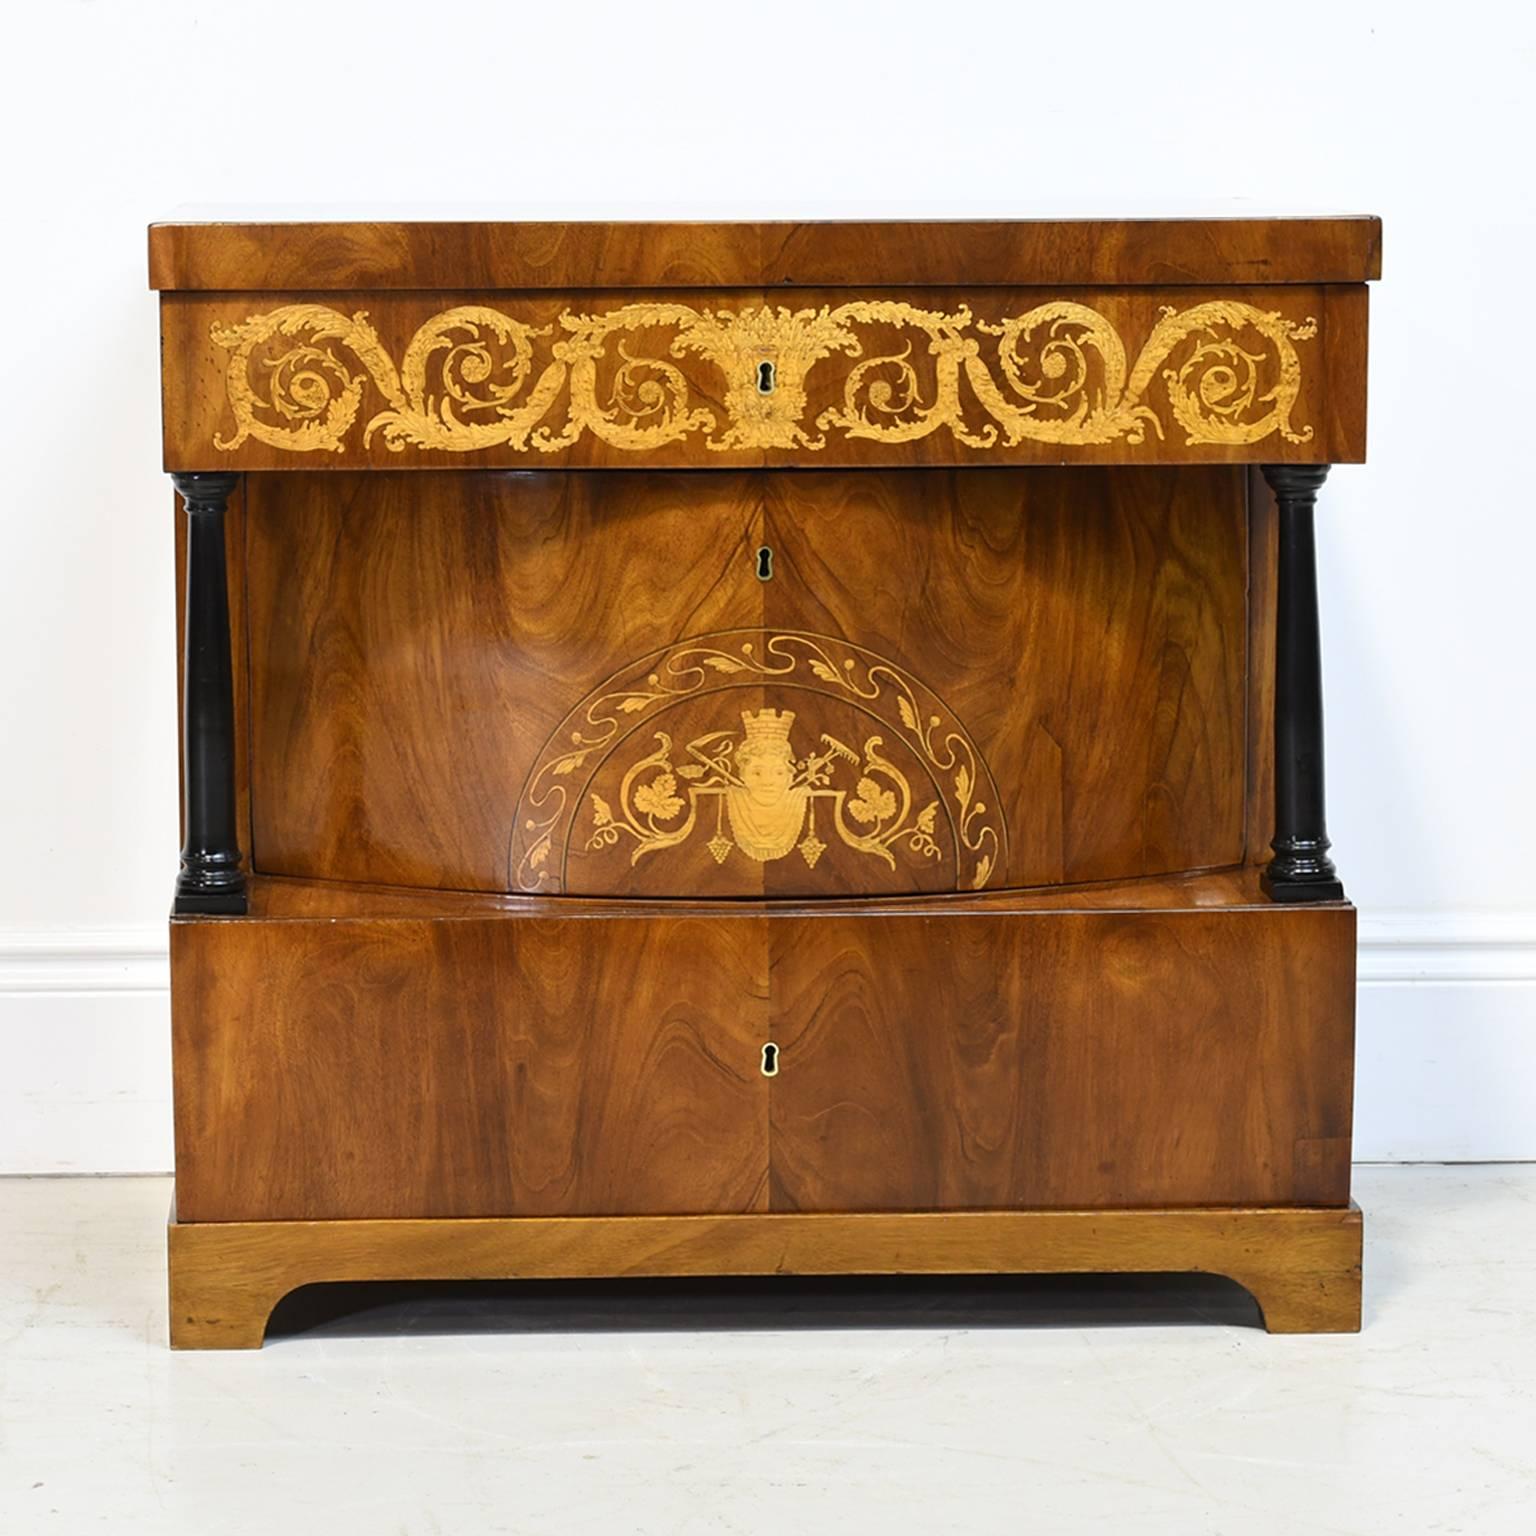 A very fine North German Biedermeier parcel-ebonized mahogany commode with top above a single drawer floridly inlaid with scrolling acanthus marquetry, the second convex-drawer inlaid with a scrolling foliate lunette and flanked by ebonized columns,